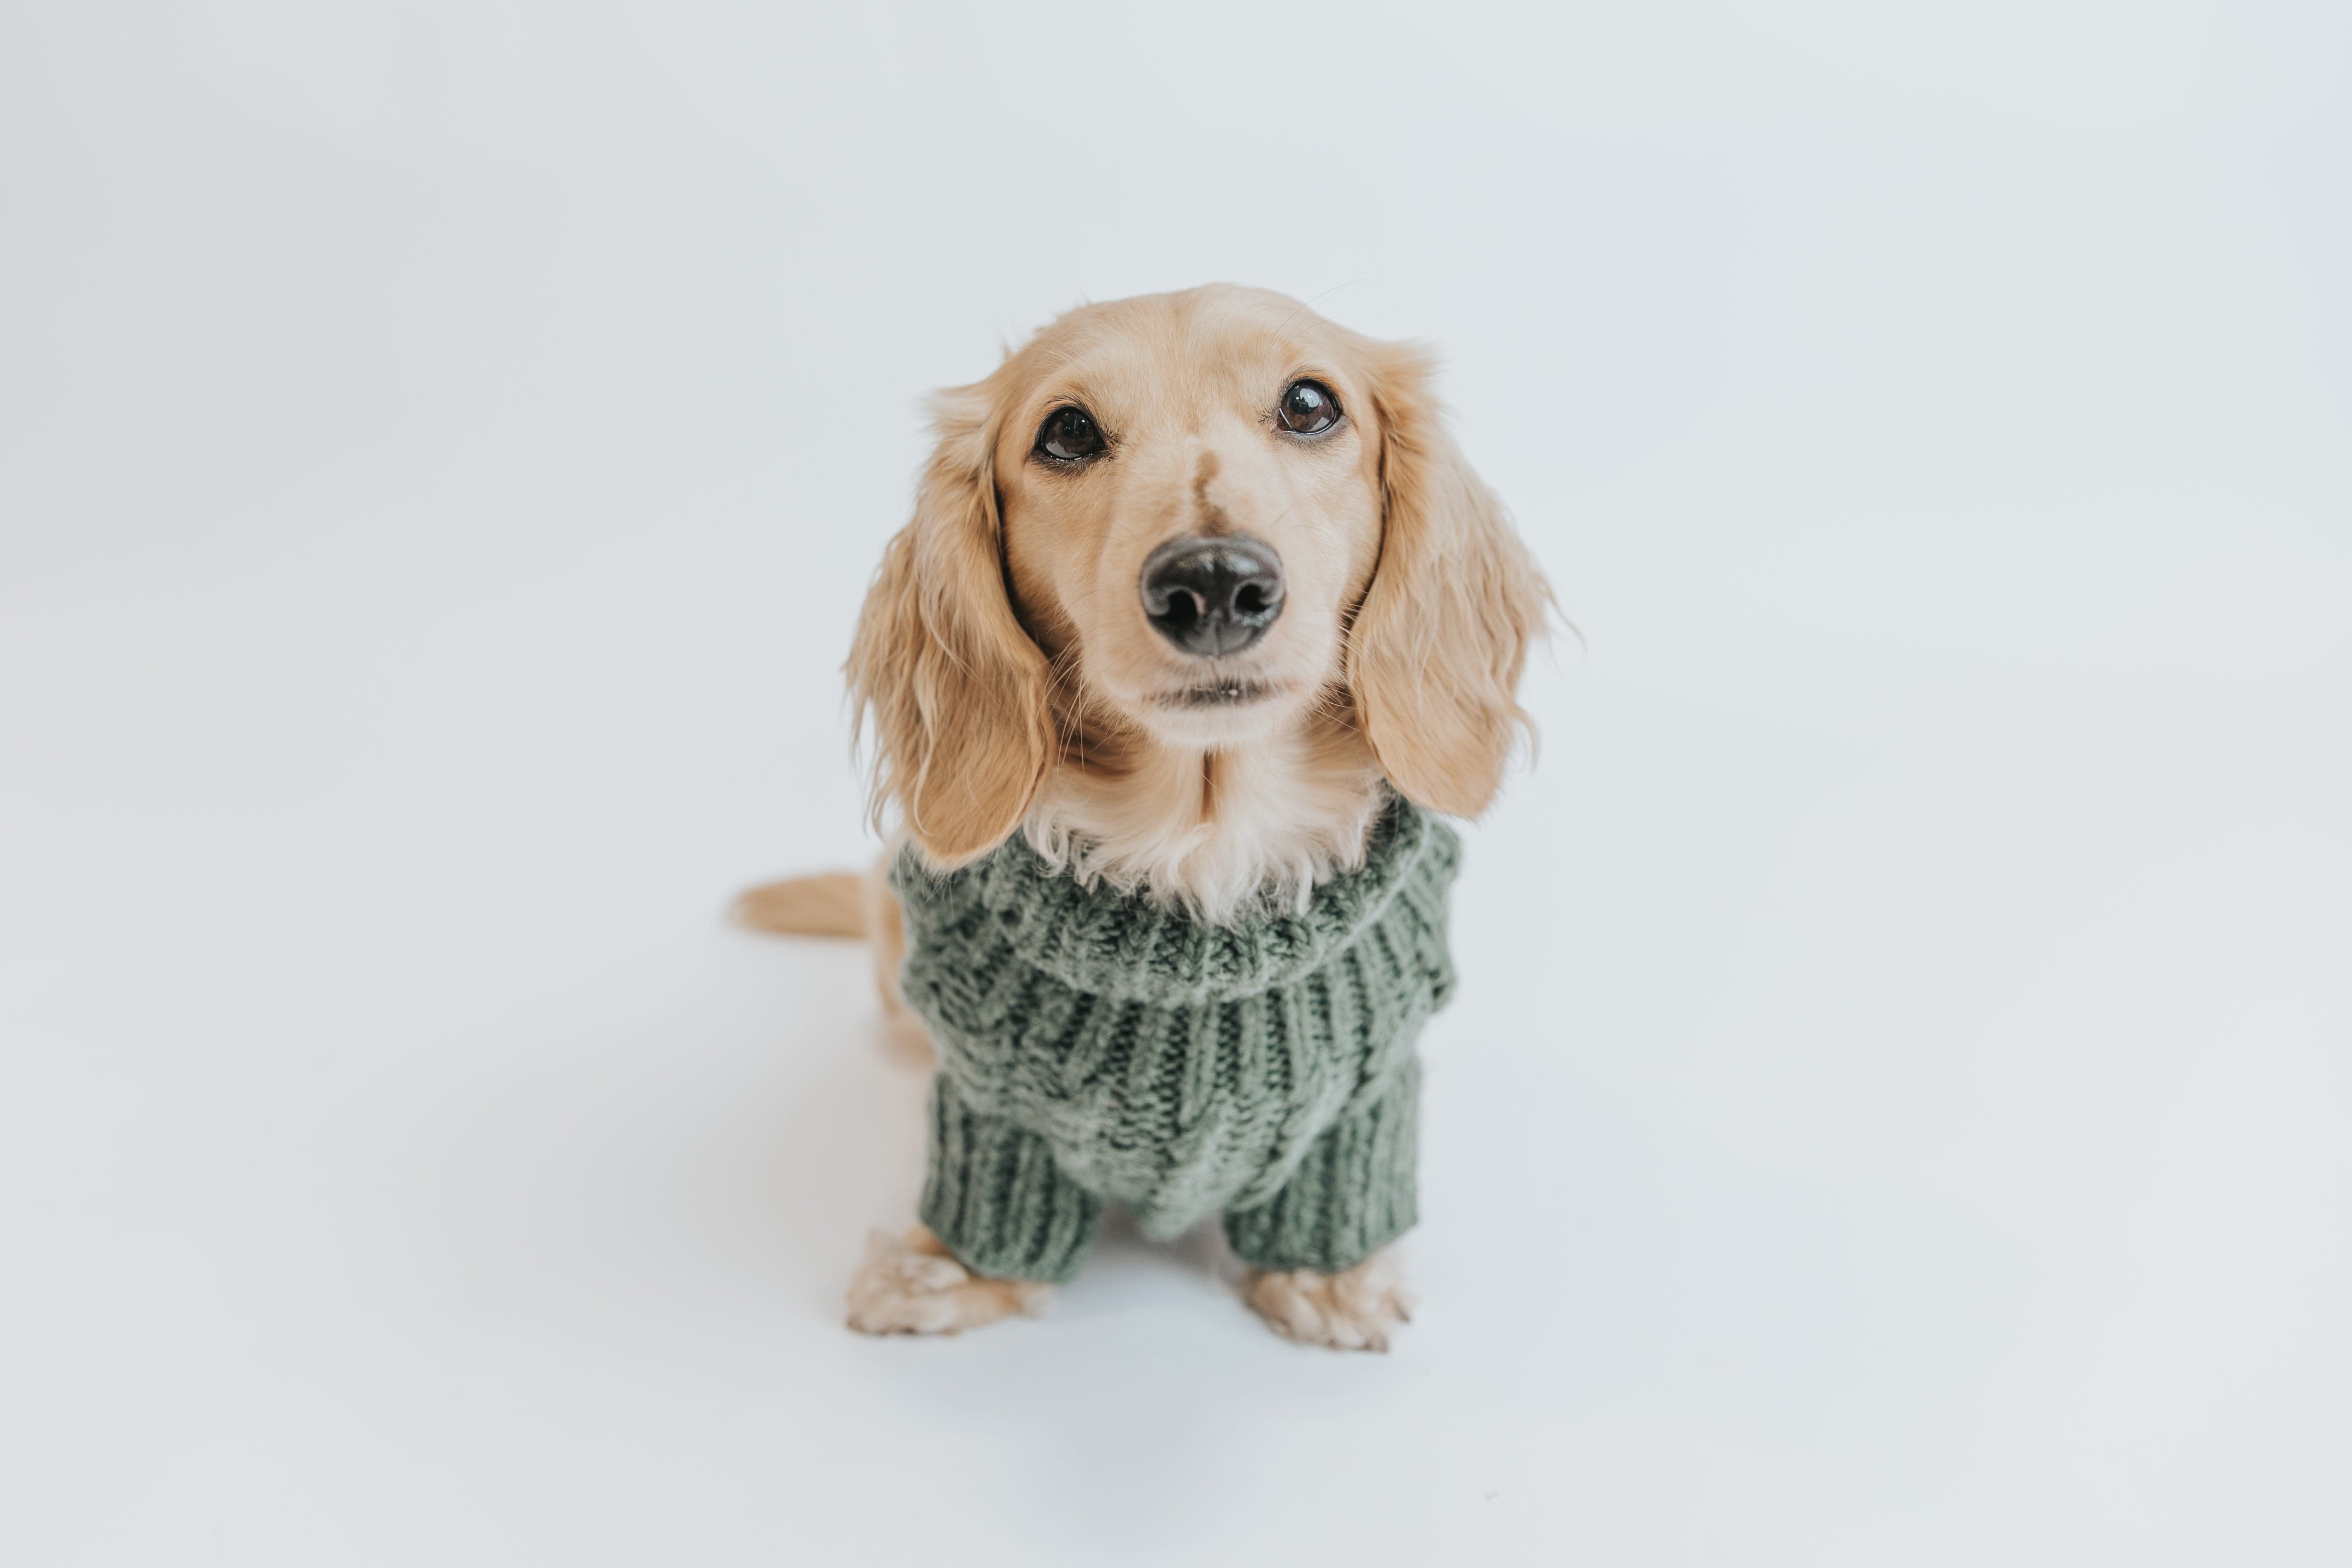 Cable Knit Sweater - Green